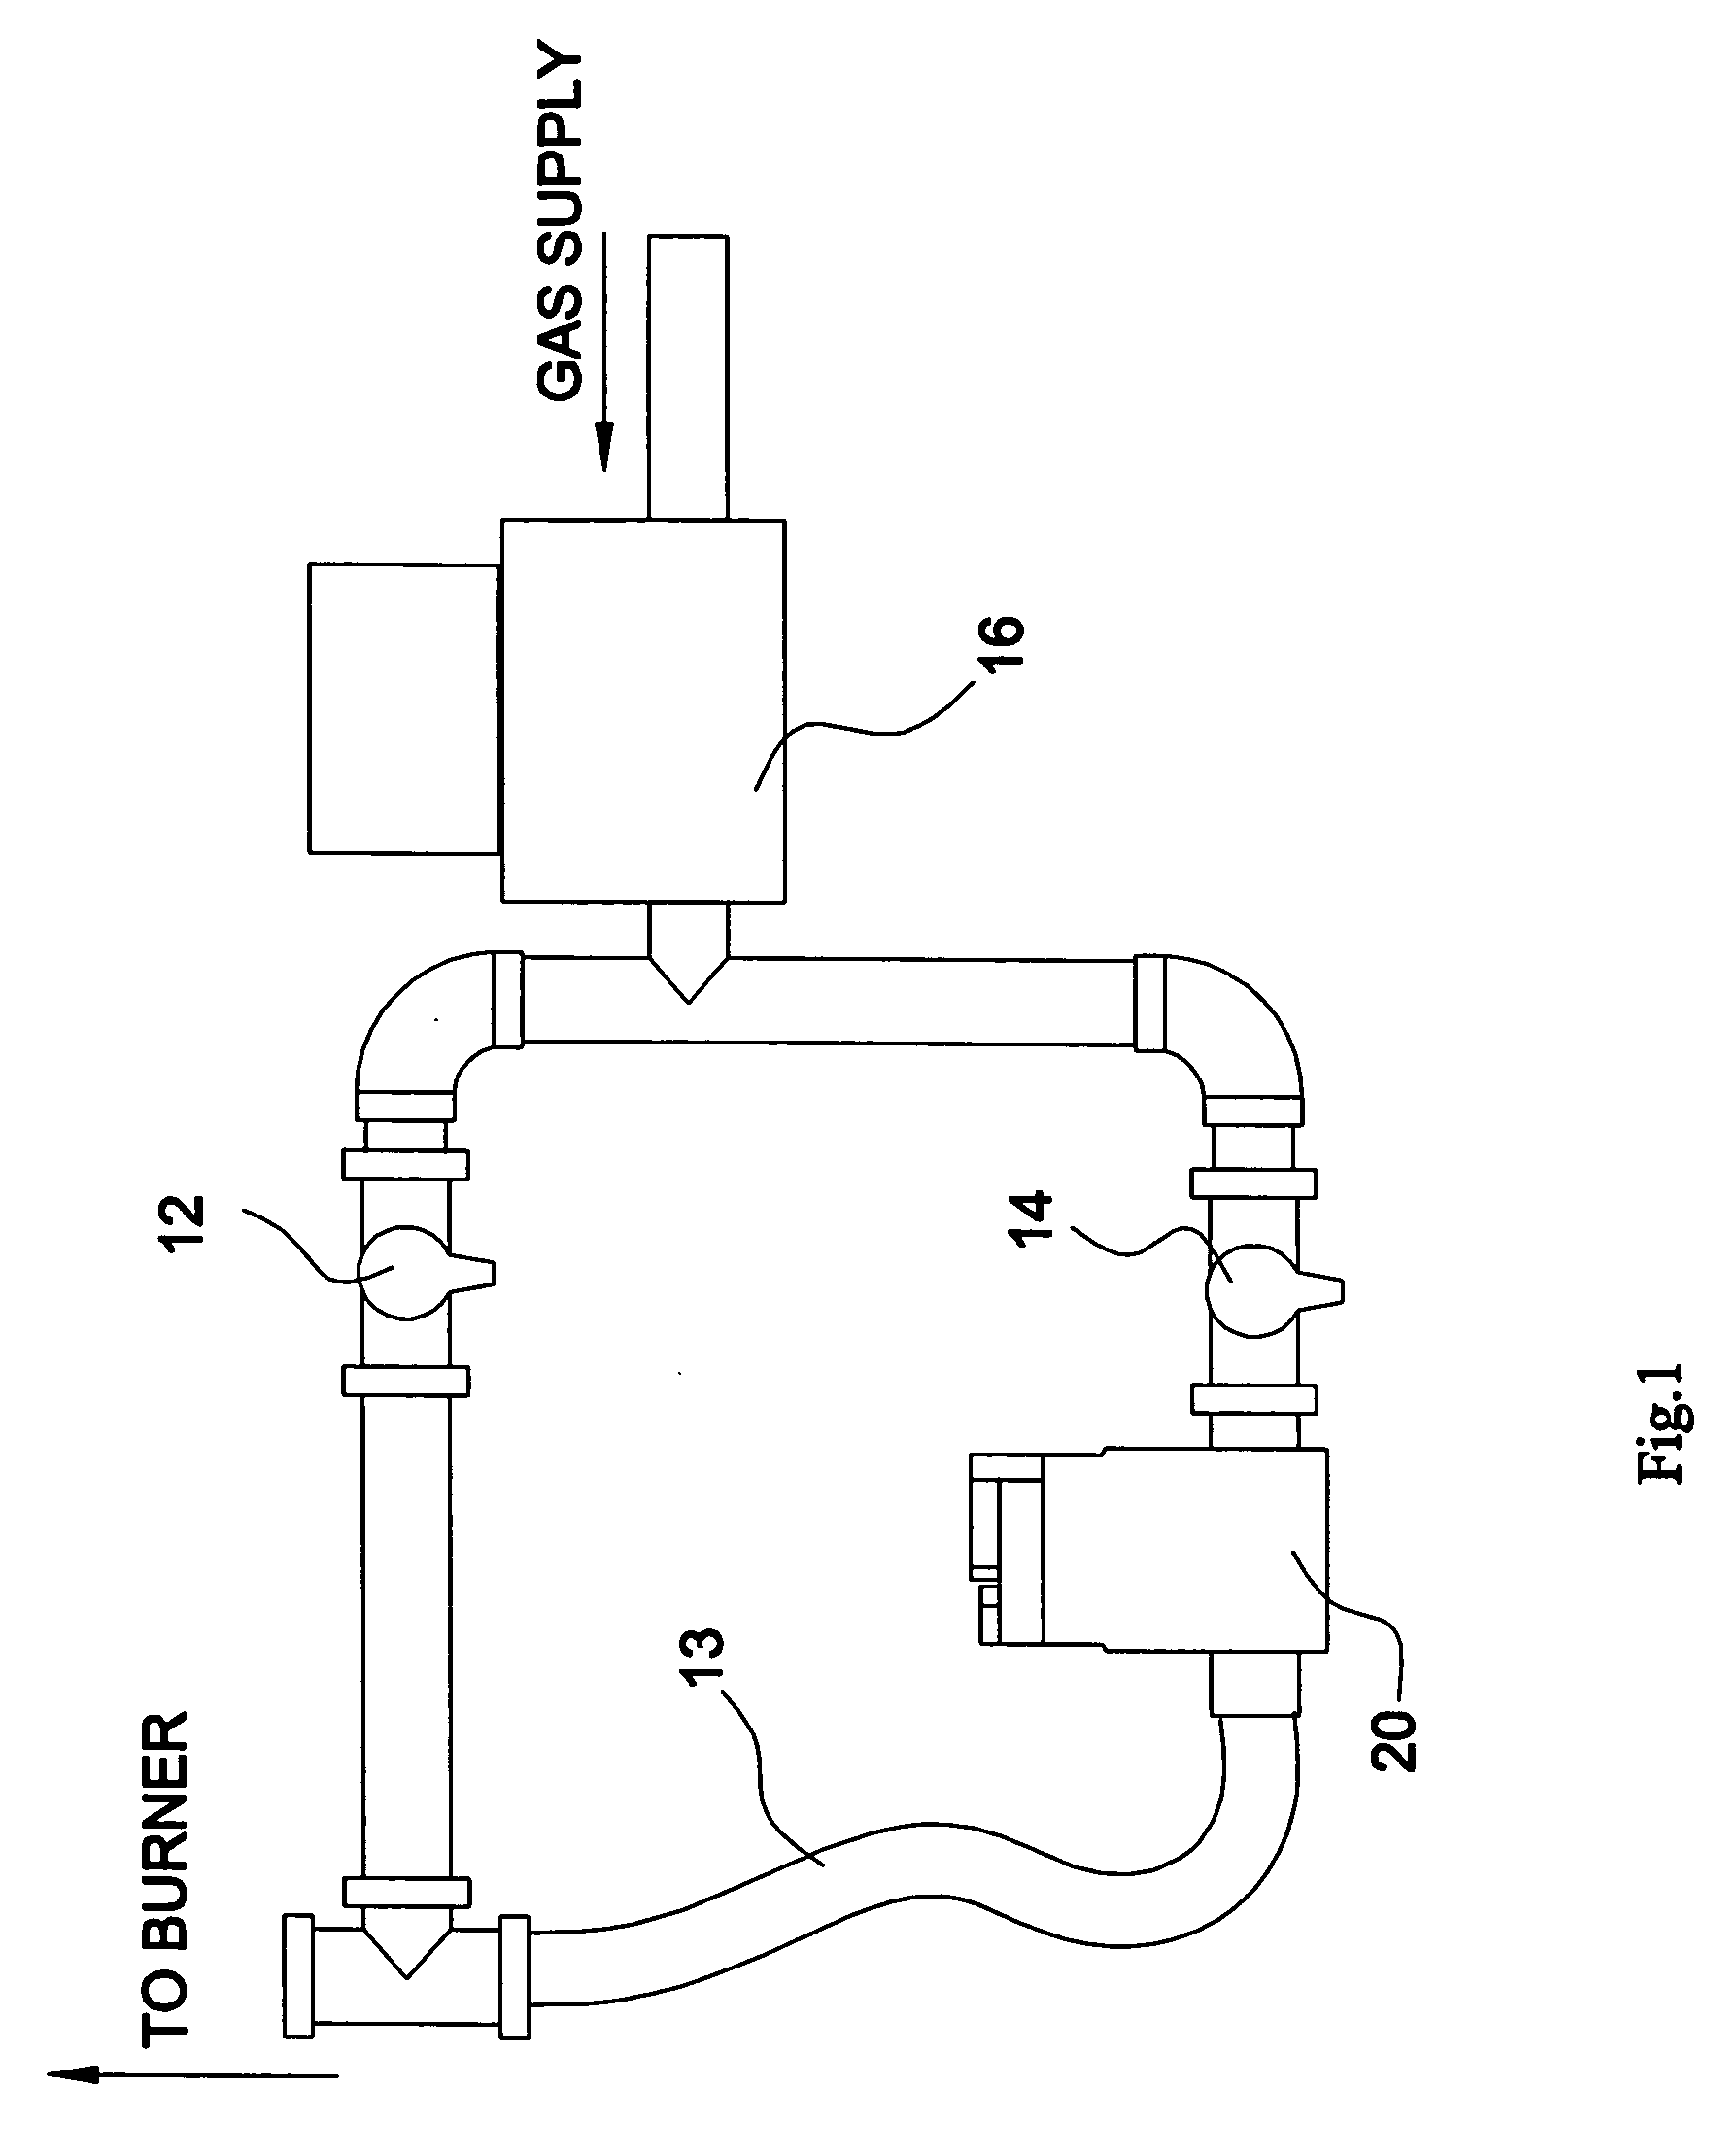 Coffee roasting control system and process